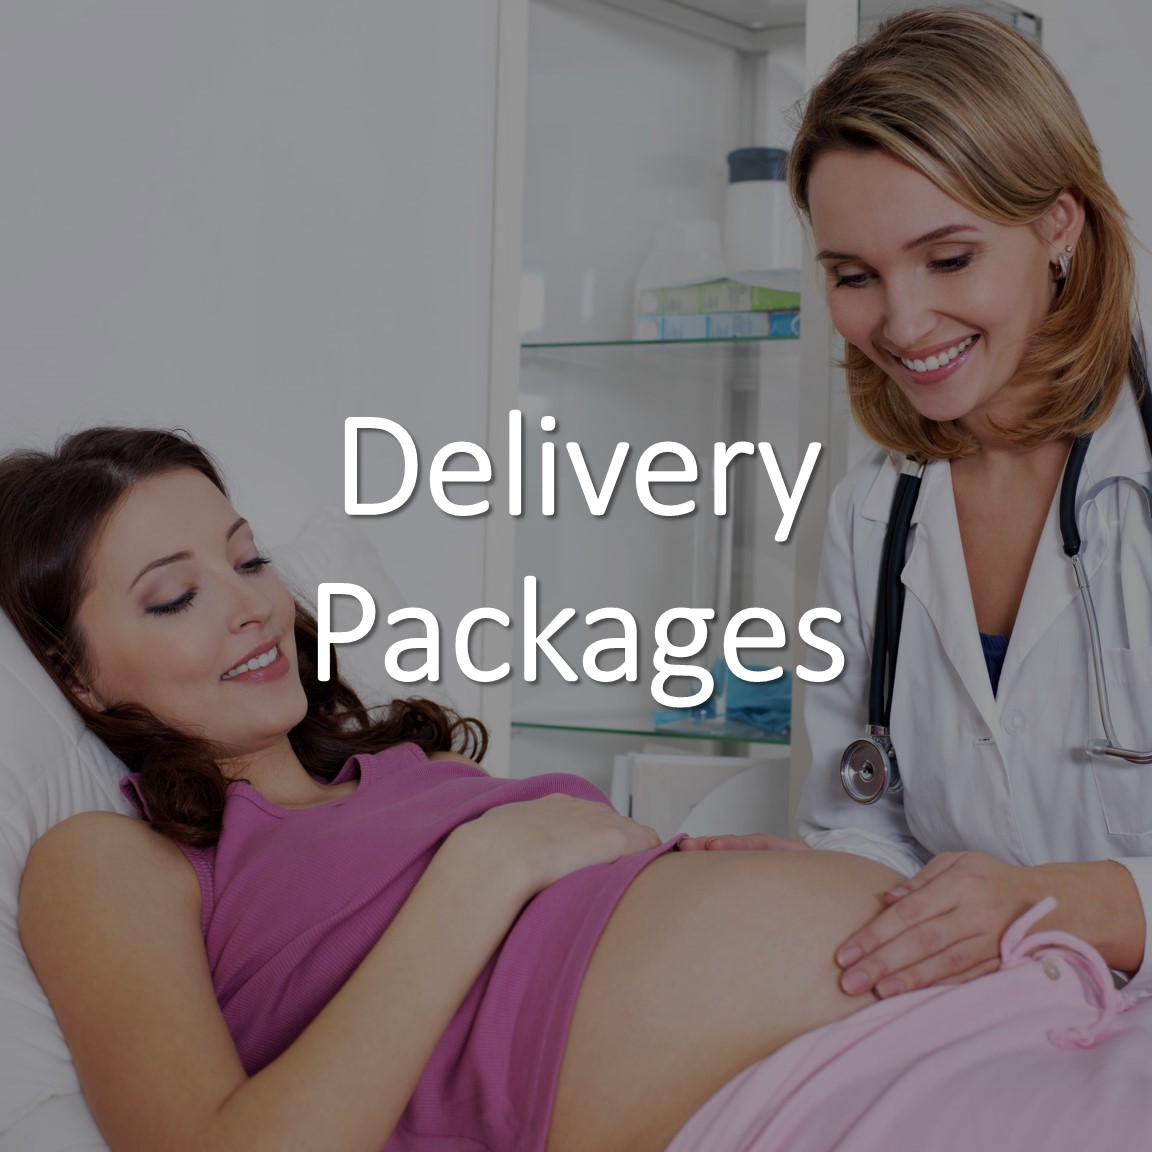 Delivery Packages